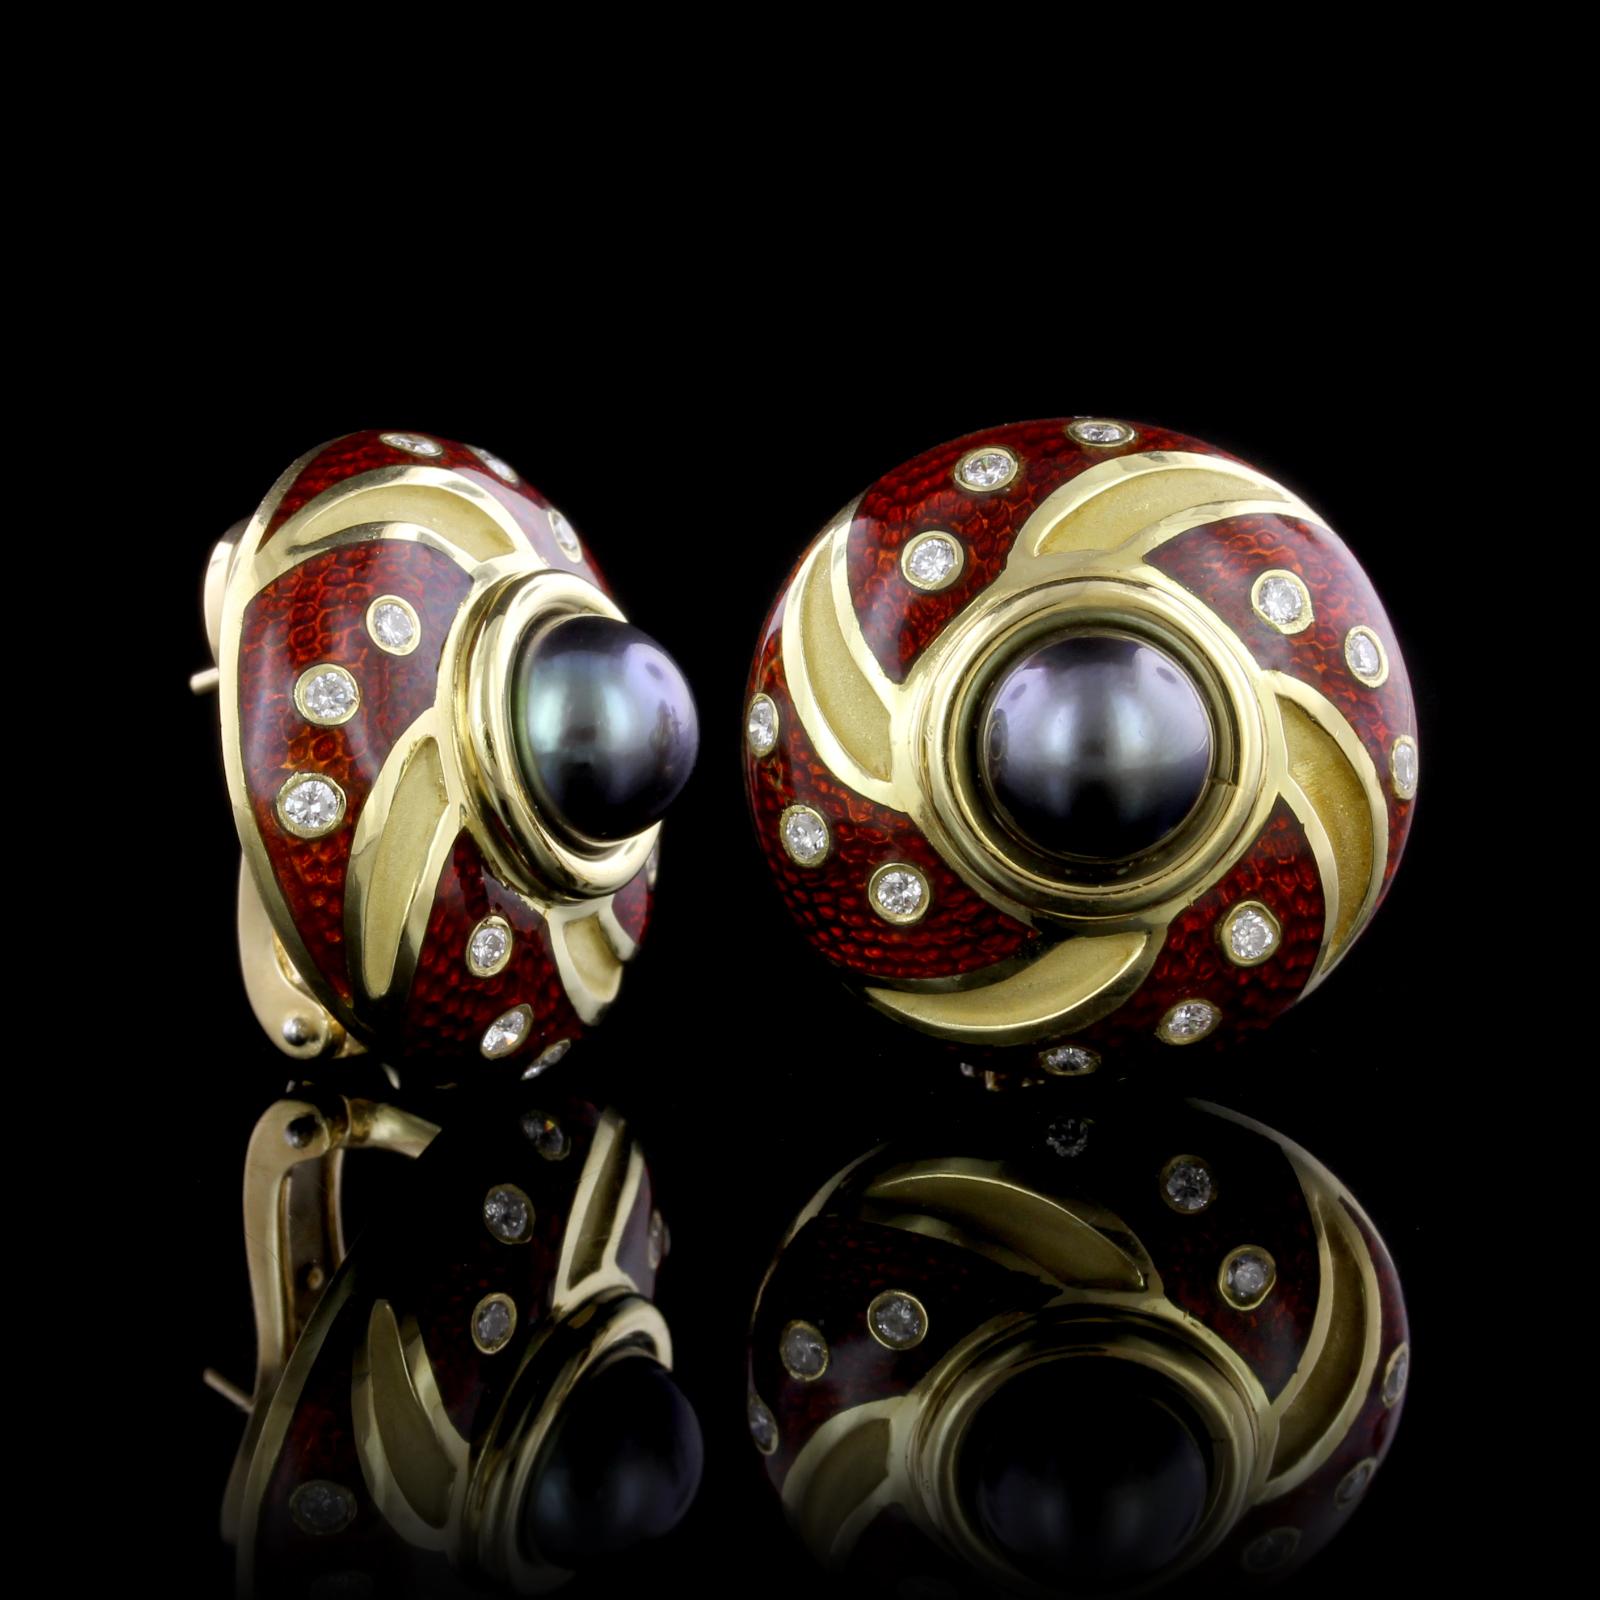 Mavito 18K Yellow Gold, Black Pearl, Enamel and Diamond Pinwheel Earrings. The earrings are set with two black pearls each measuring 8.00mm., 22 full cut diamonds, approx. total wt. .36cts., GH color, VS2-SI1 clarity, with red enamel accents, length